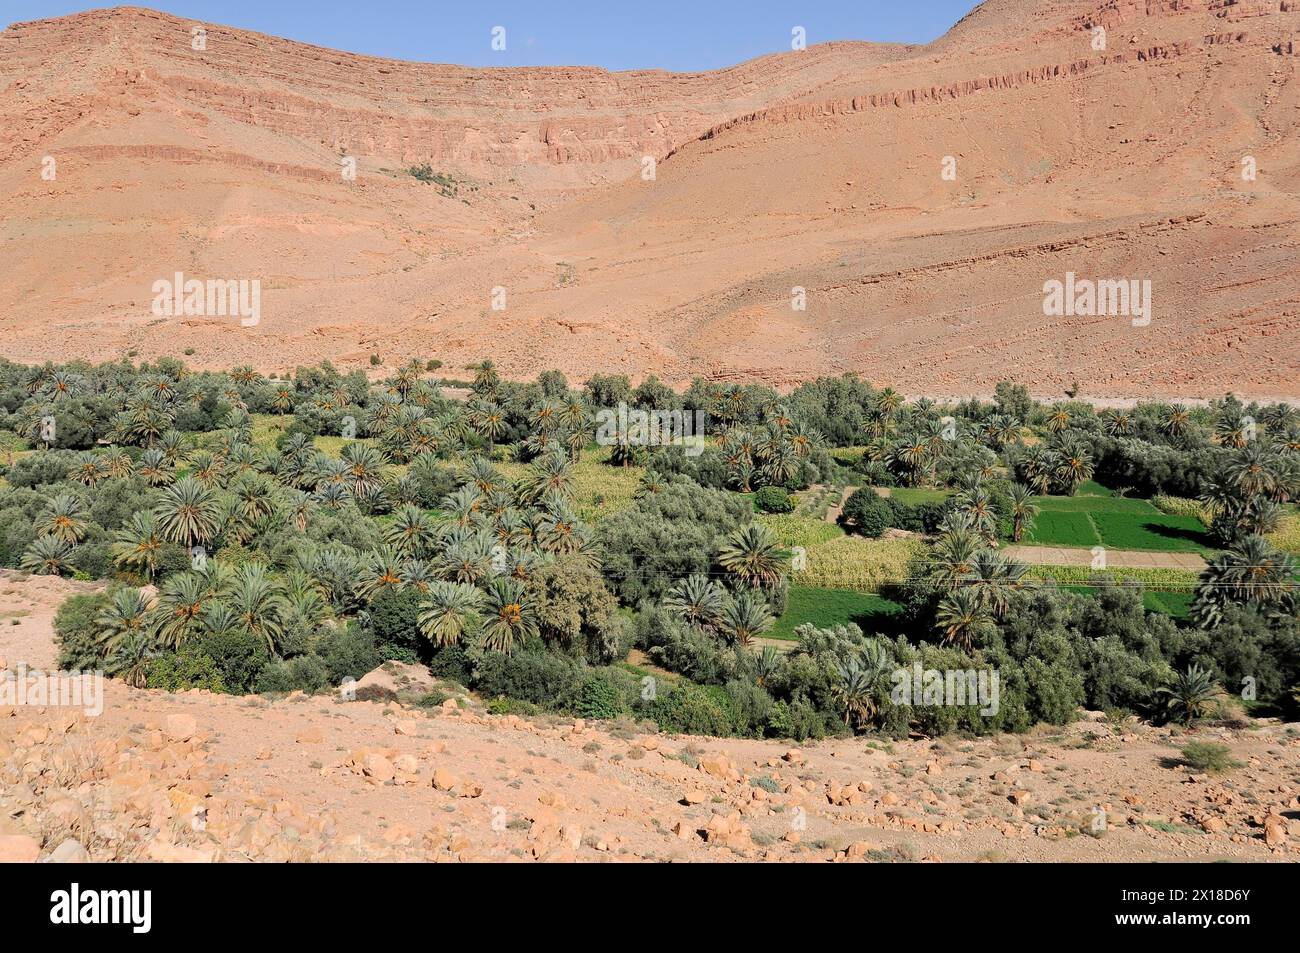 Near Fez, A fertile oasis with green vegetation in the middle of an arid desert landscape, Northern Morocco, Morocco Stock Photo